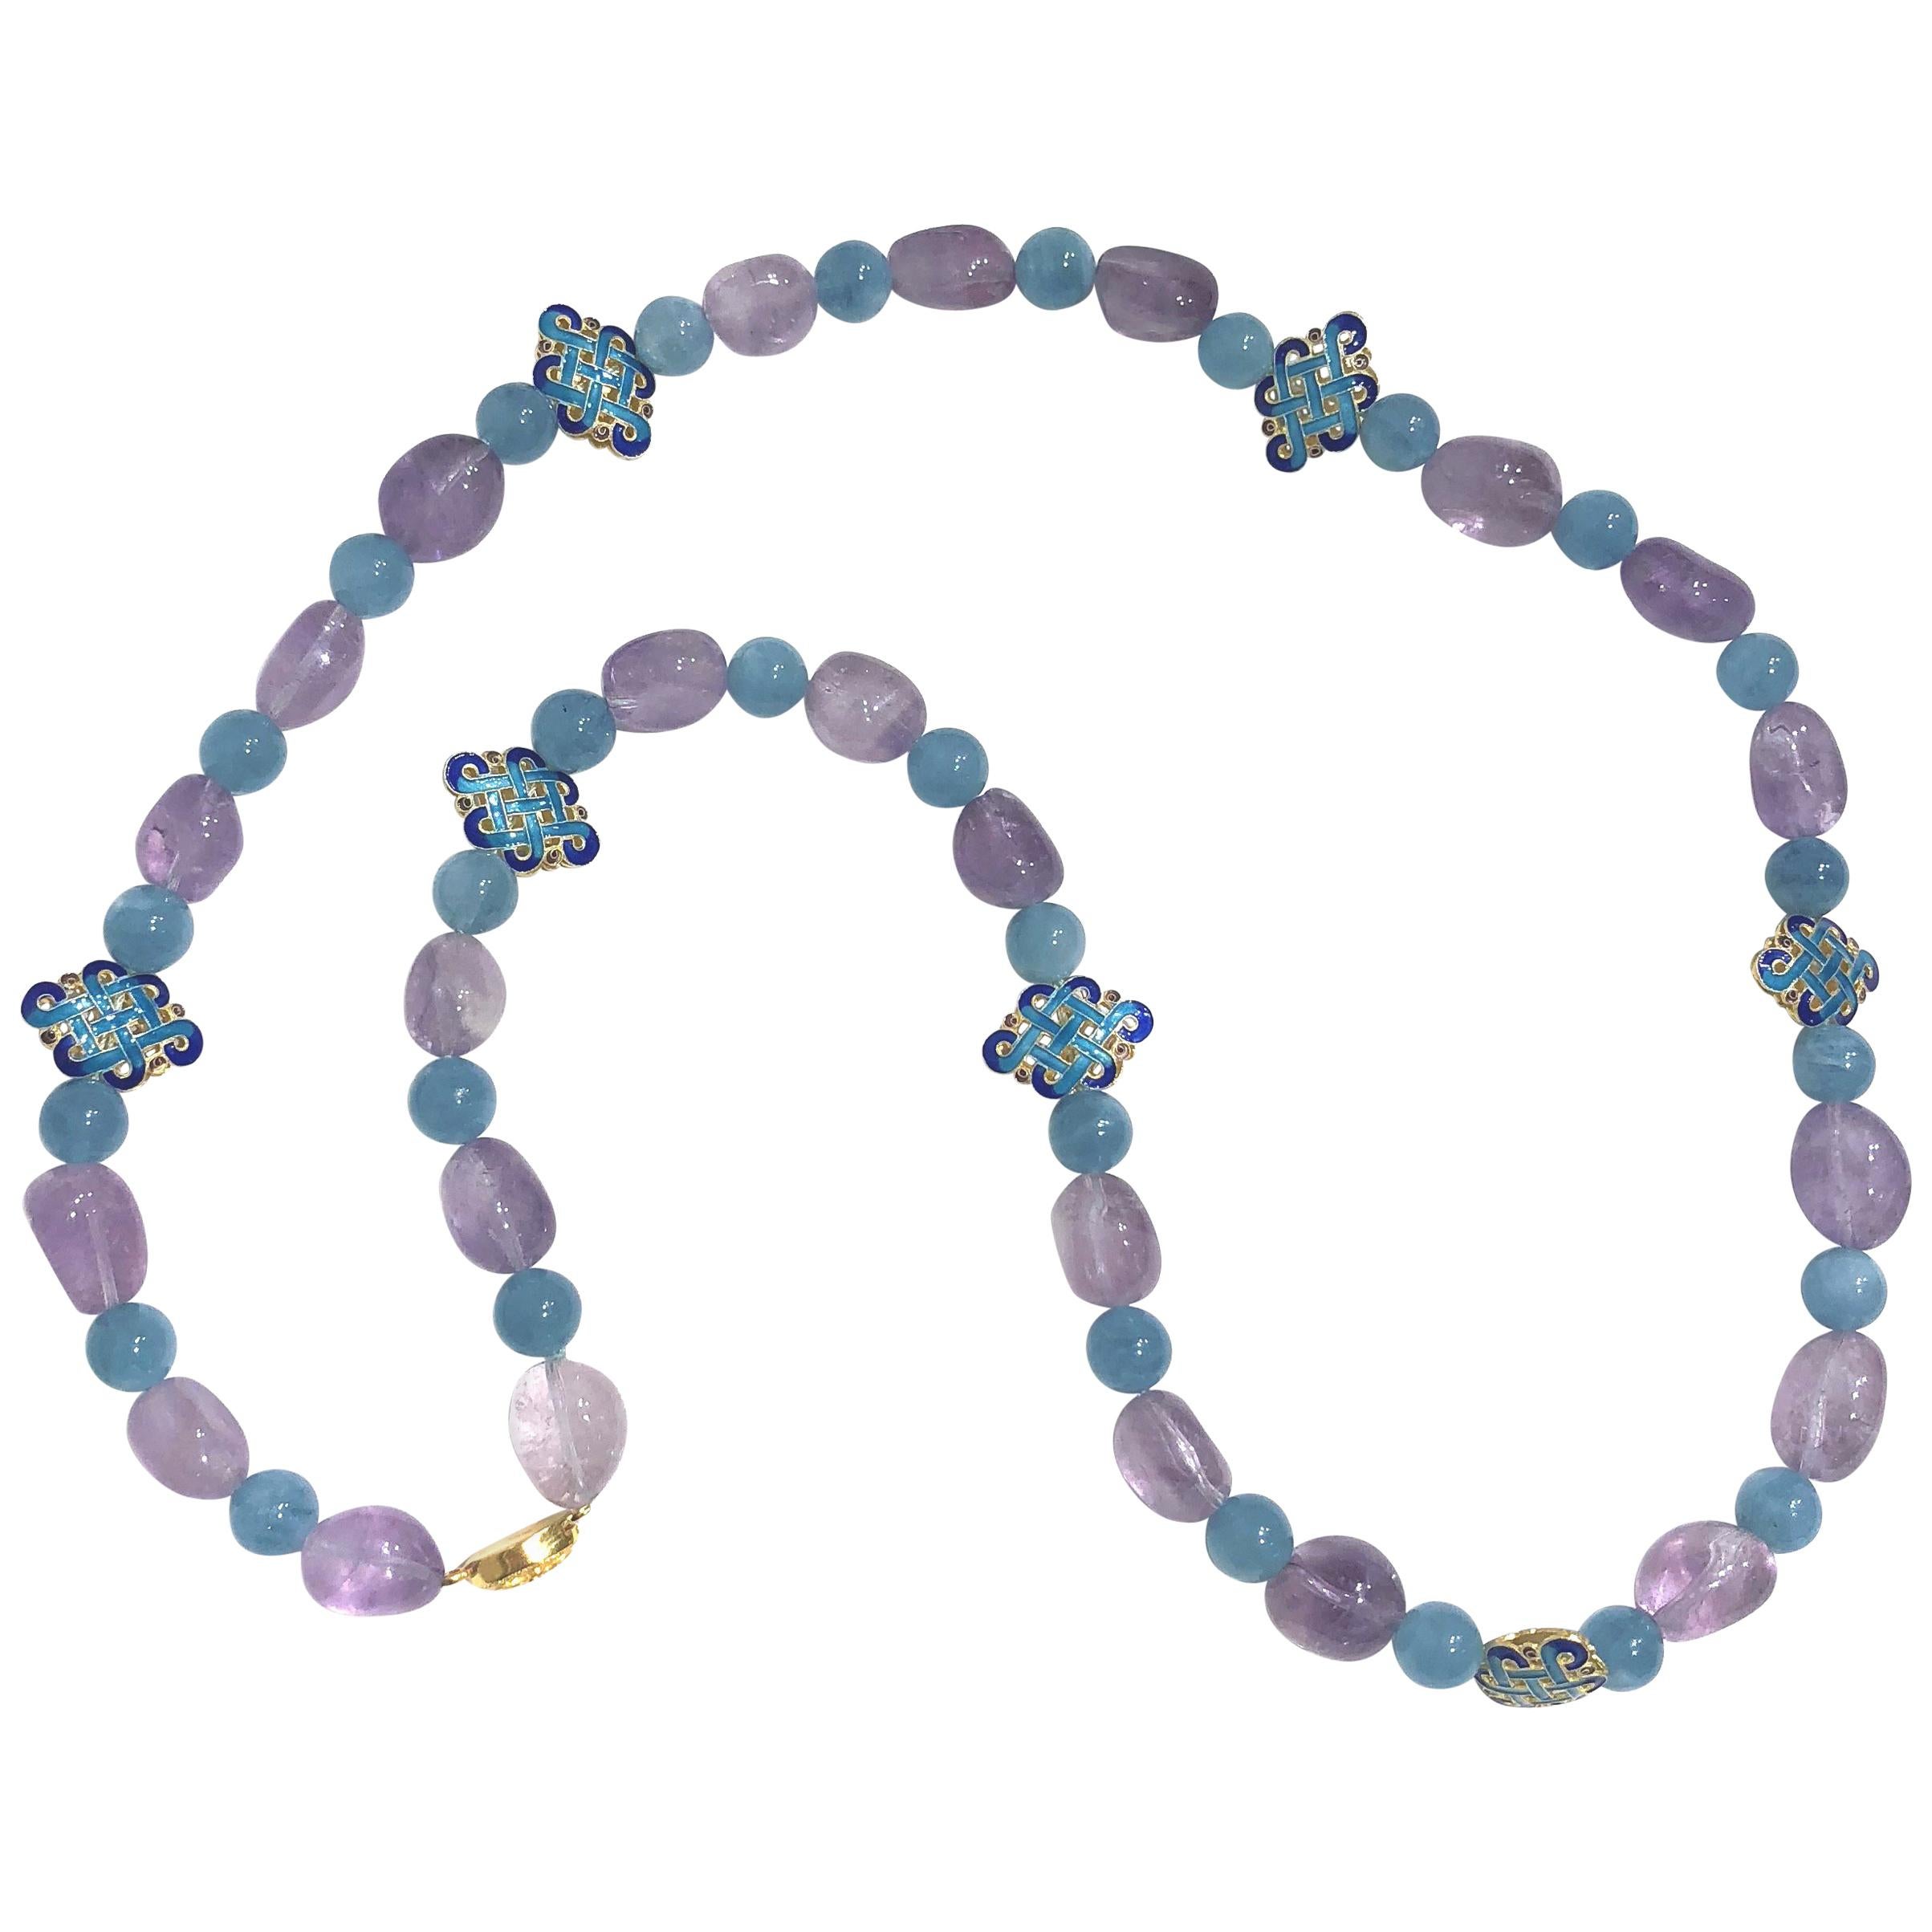 Amethyst, Aquamarine and Vermeil Beaded Necklace